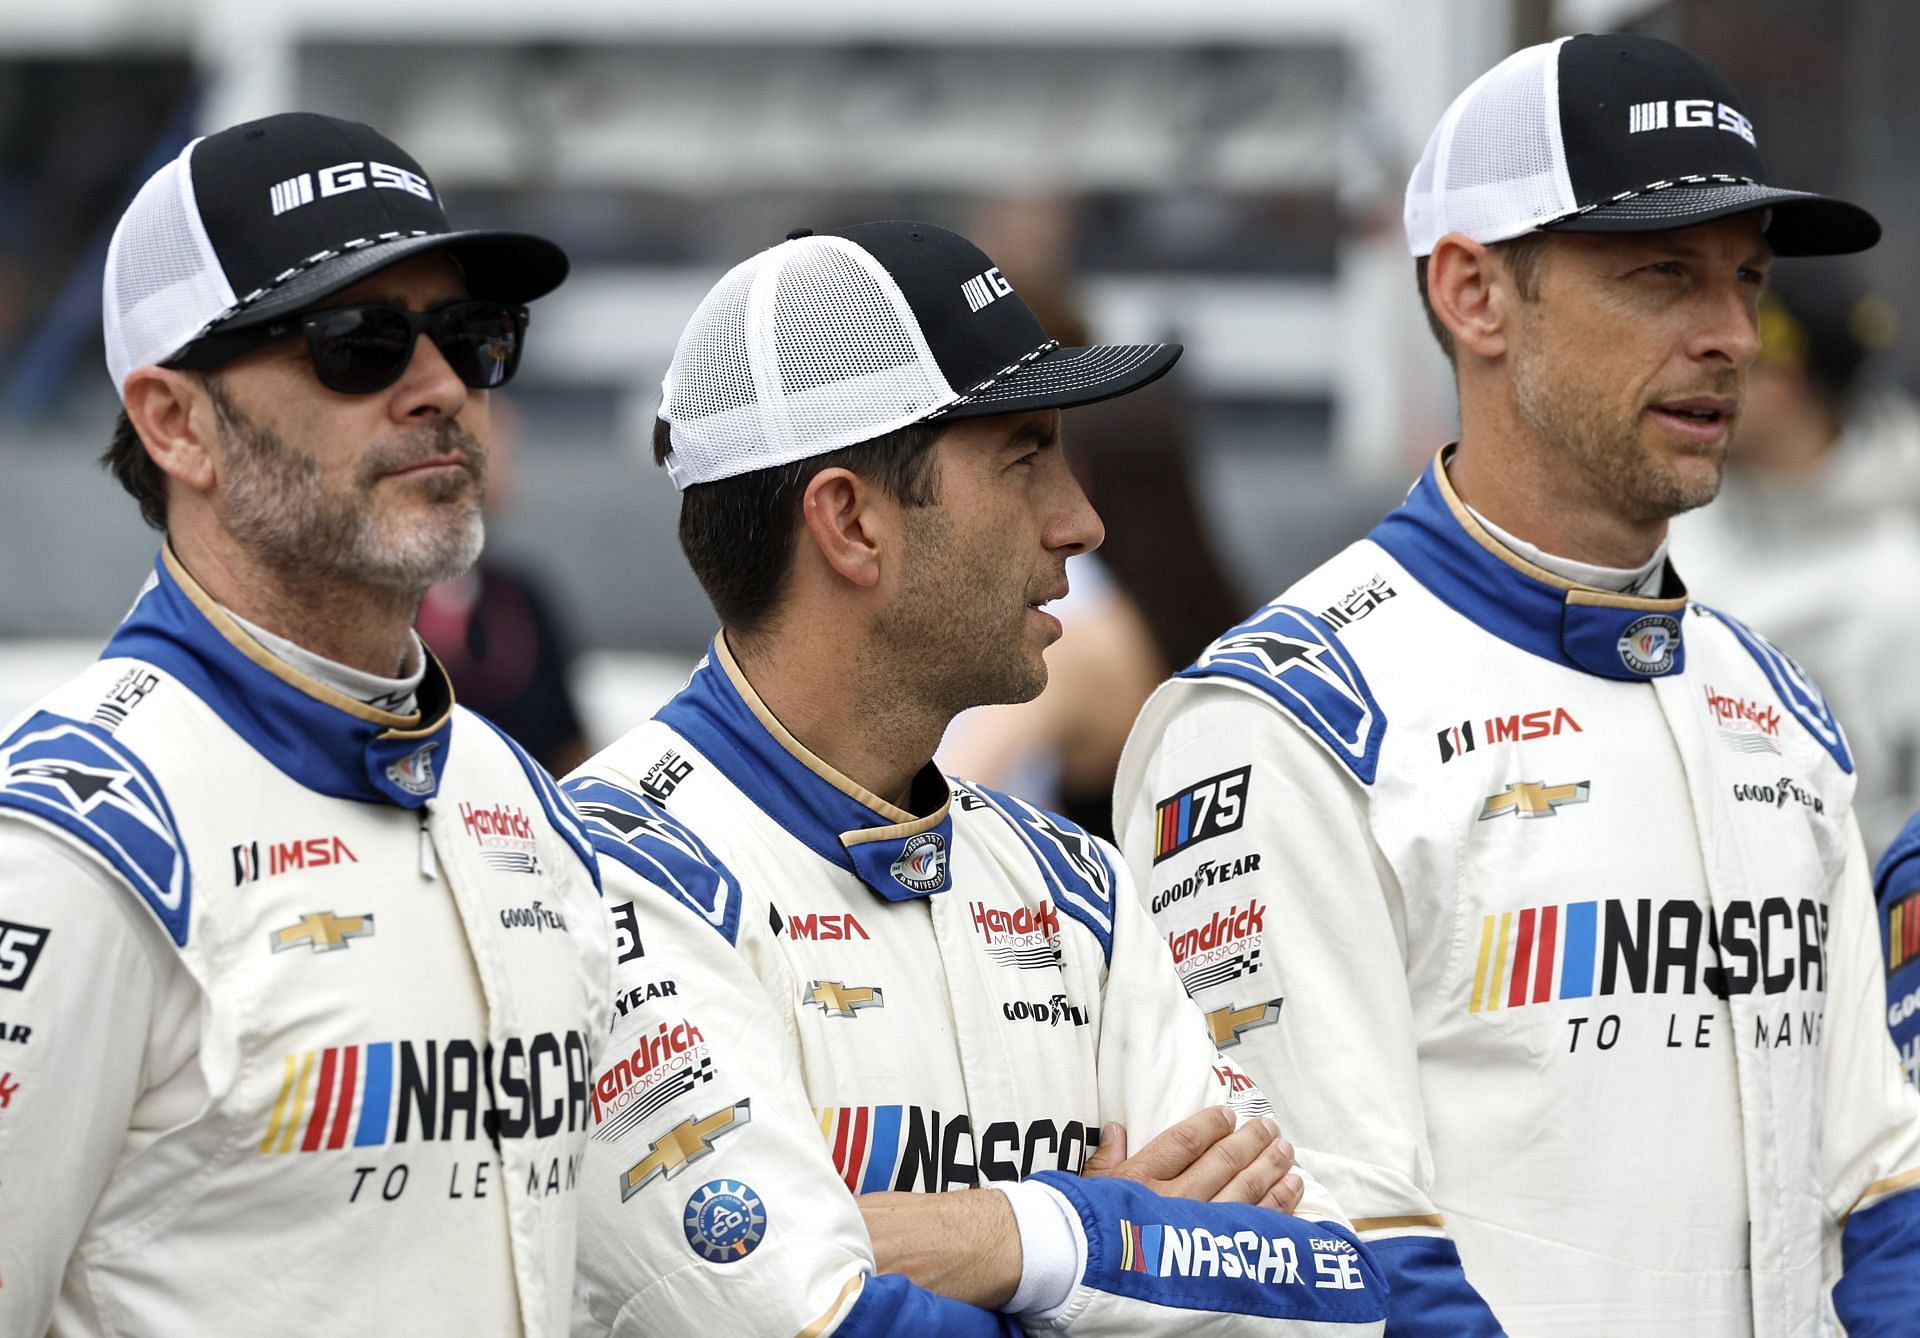 Jimmie Johnson opens up about his experience with NASCAR’s Garage 56